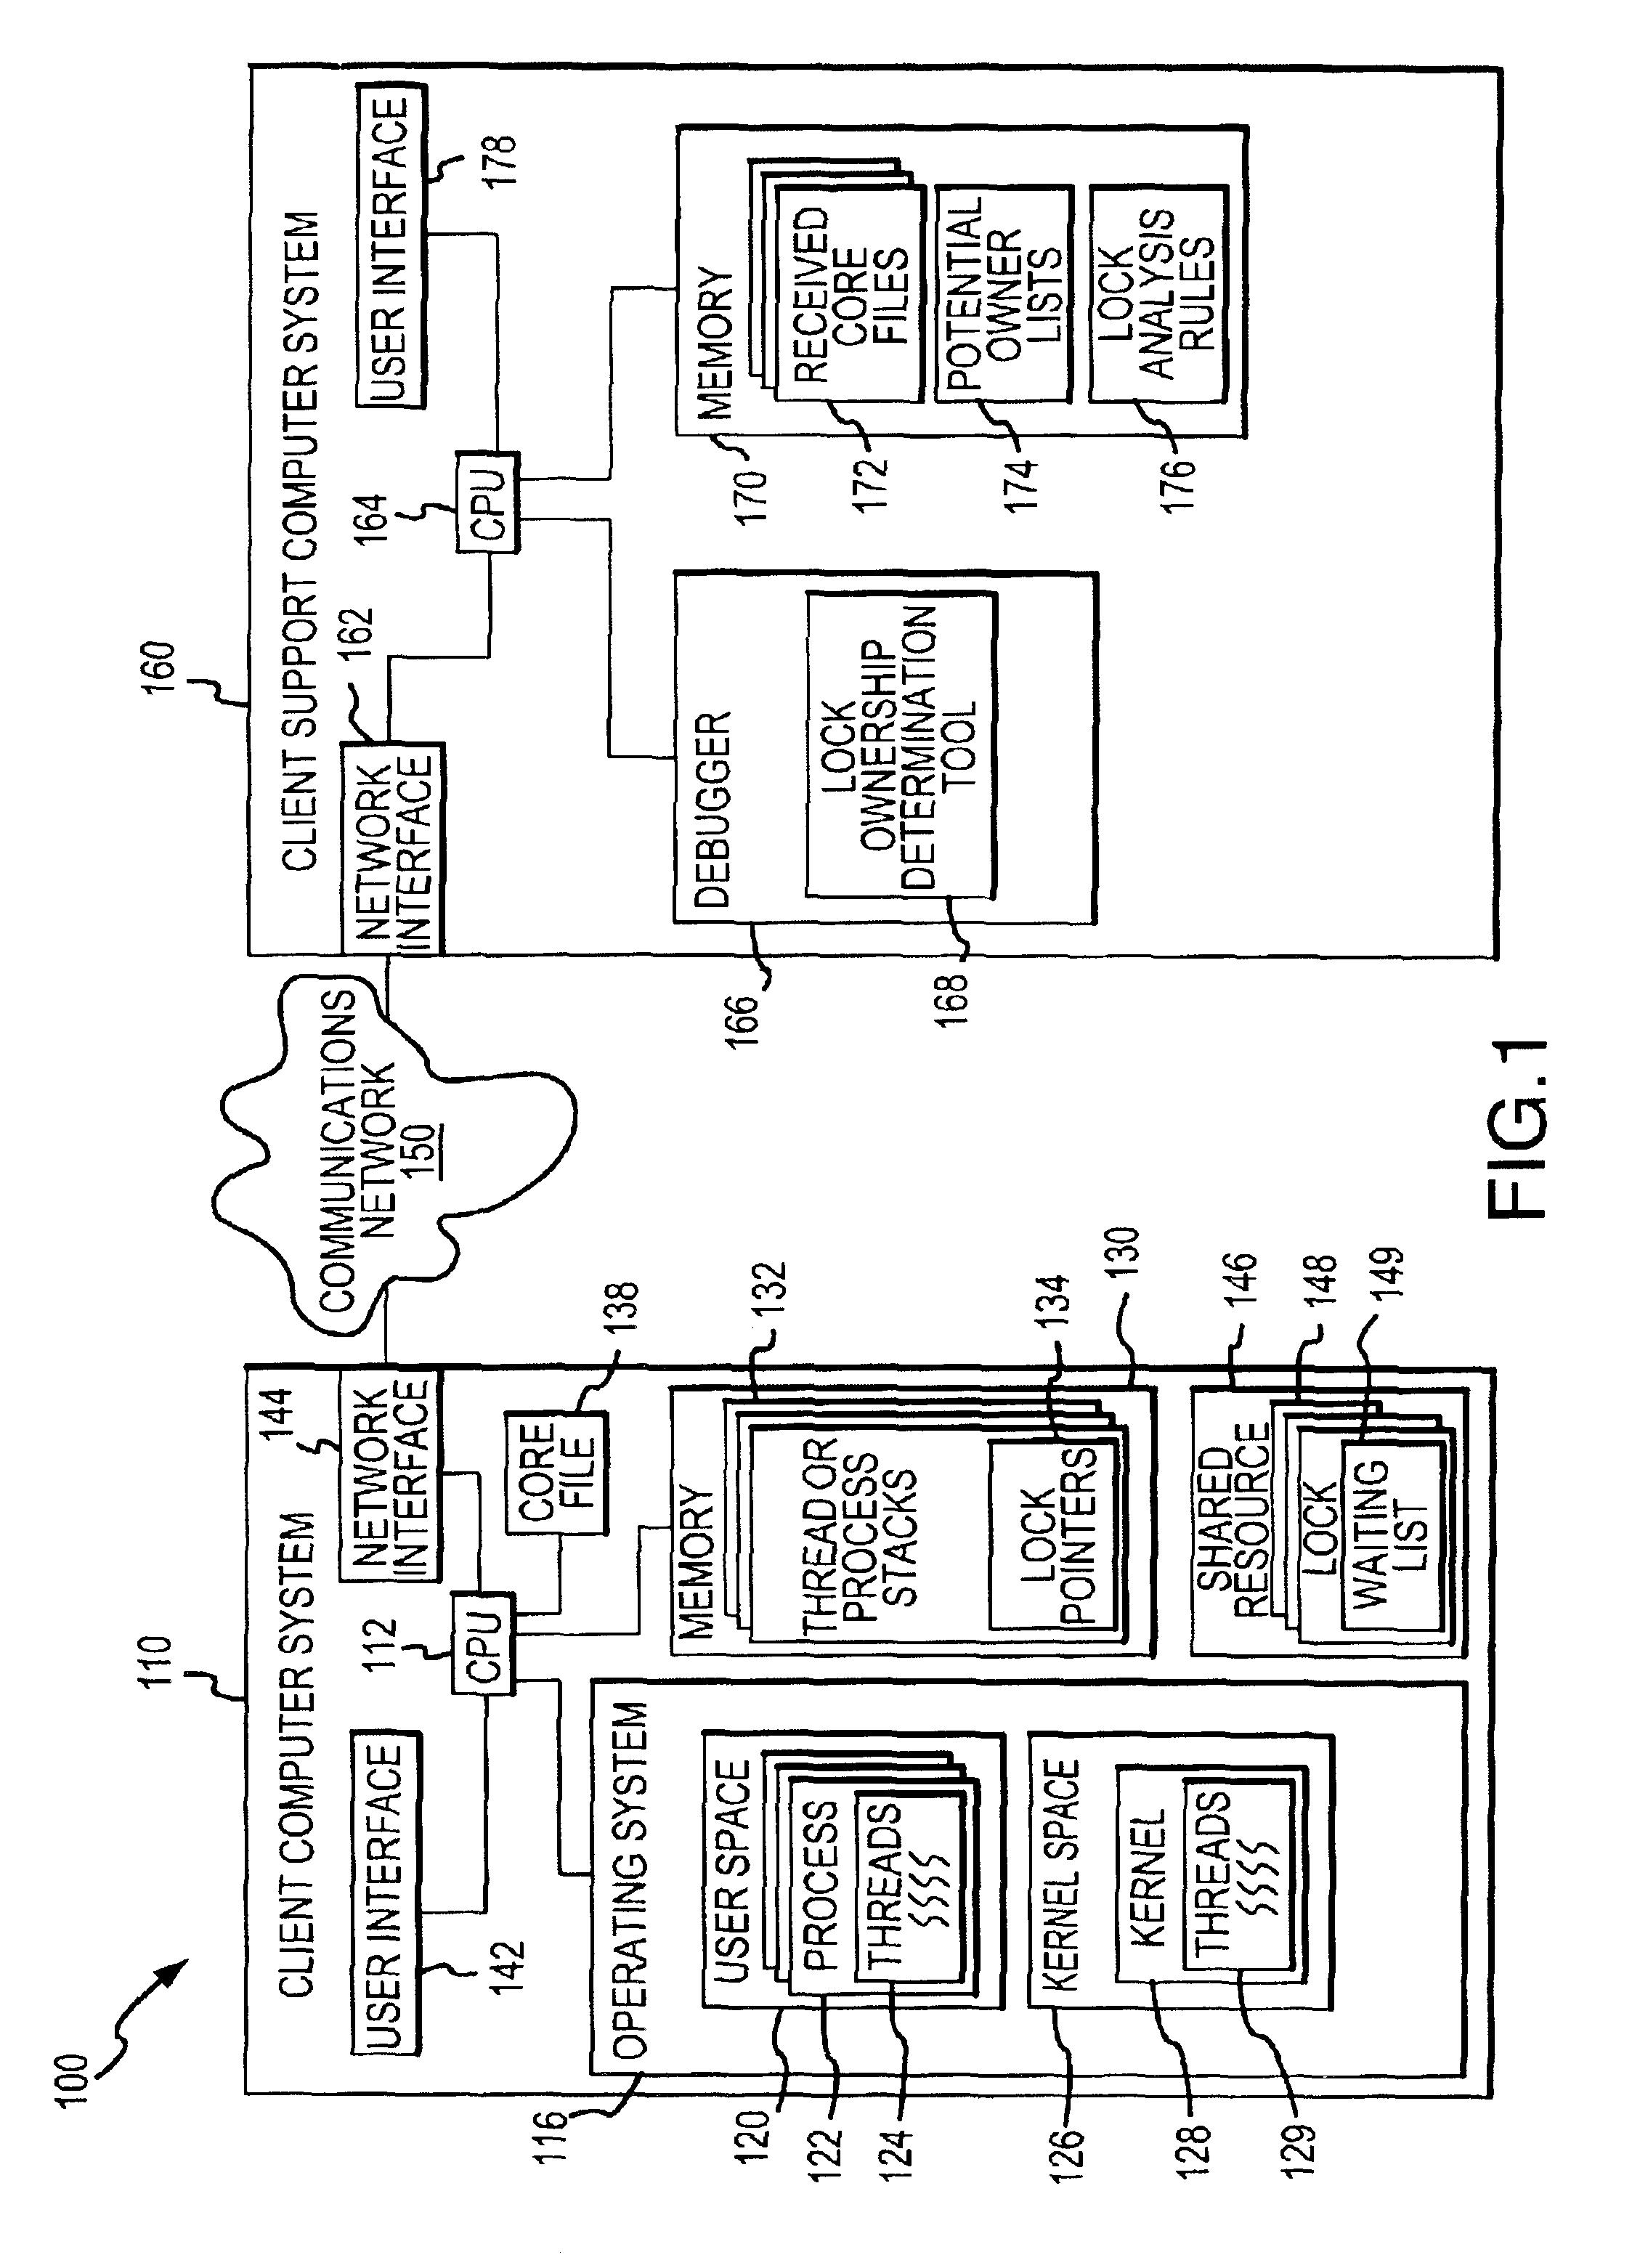 Method and tool for determining ownership of a multiple owner lock in multithreading environments